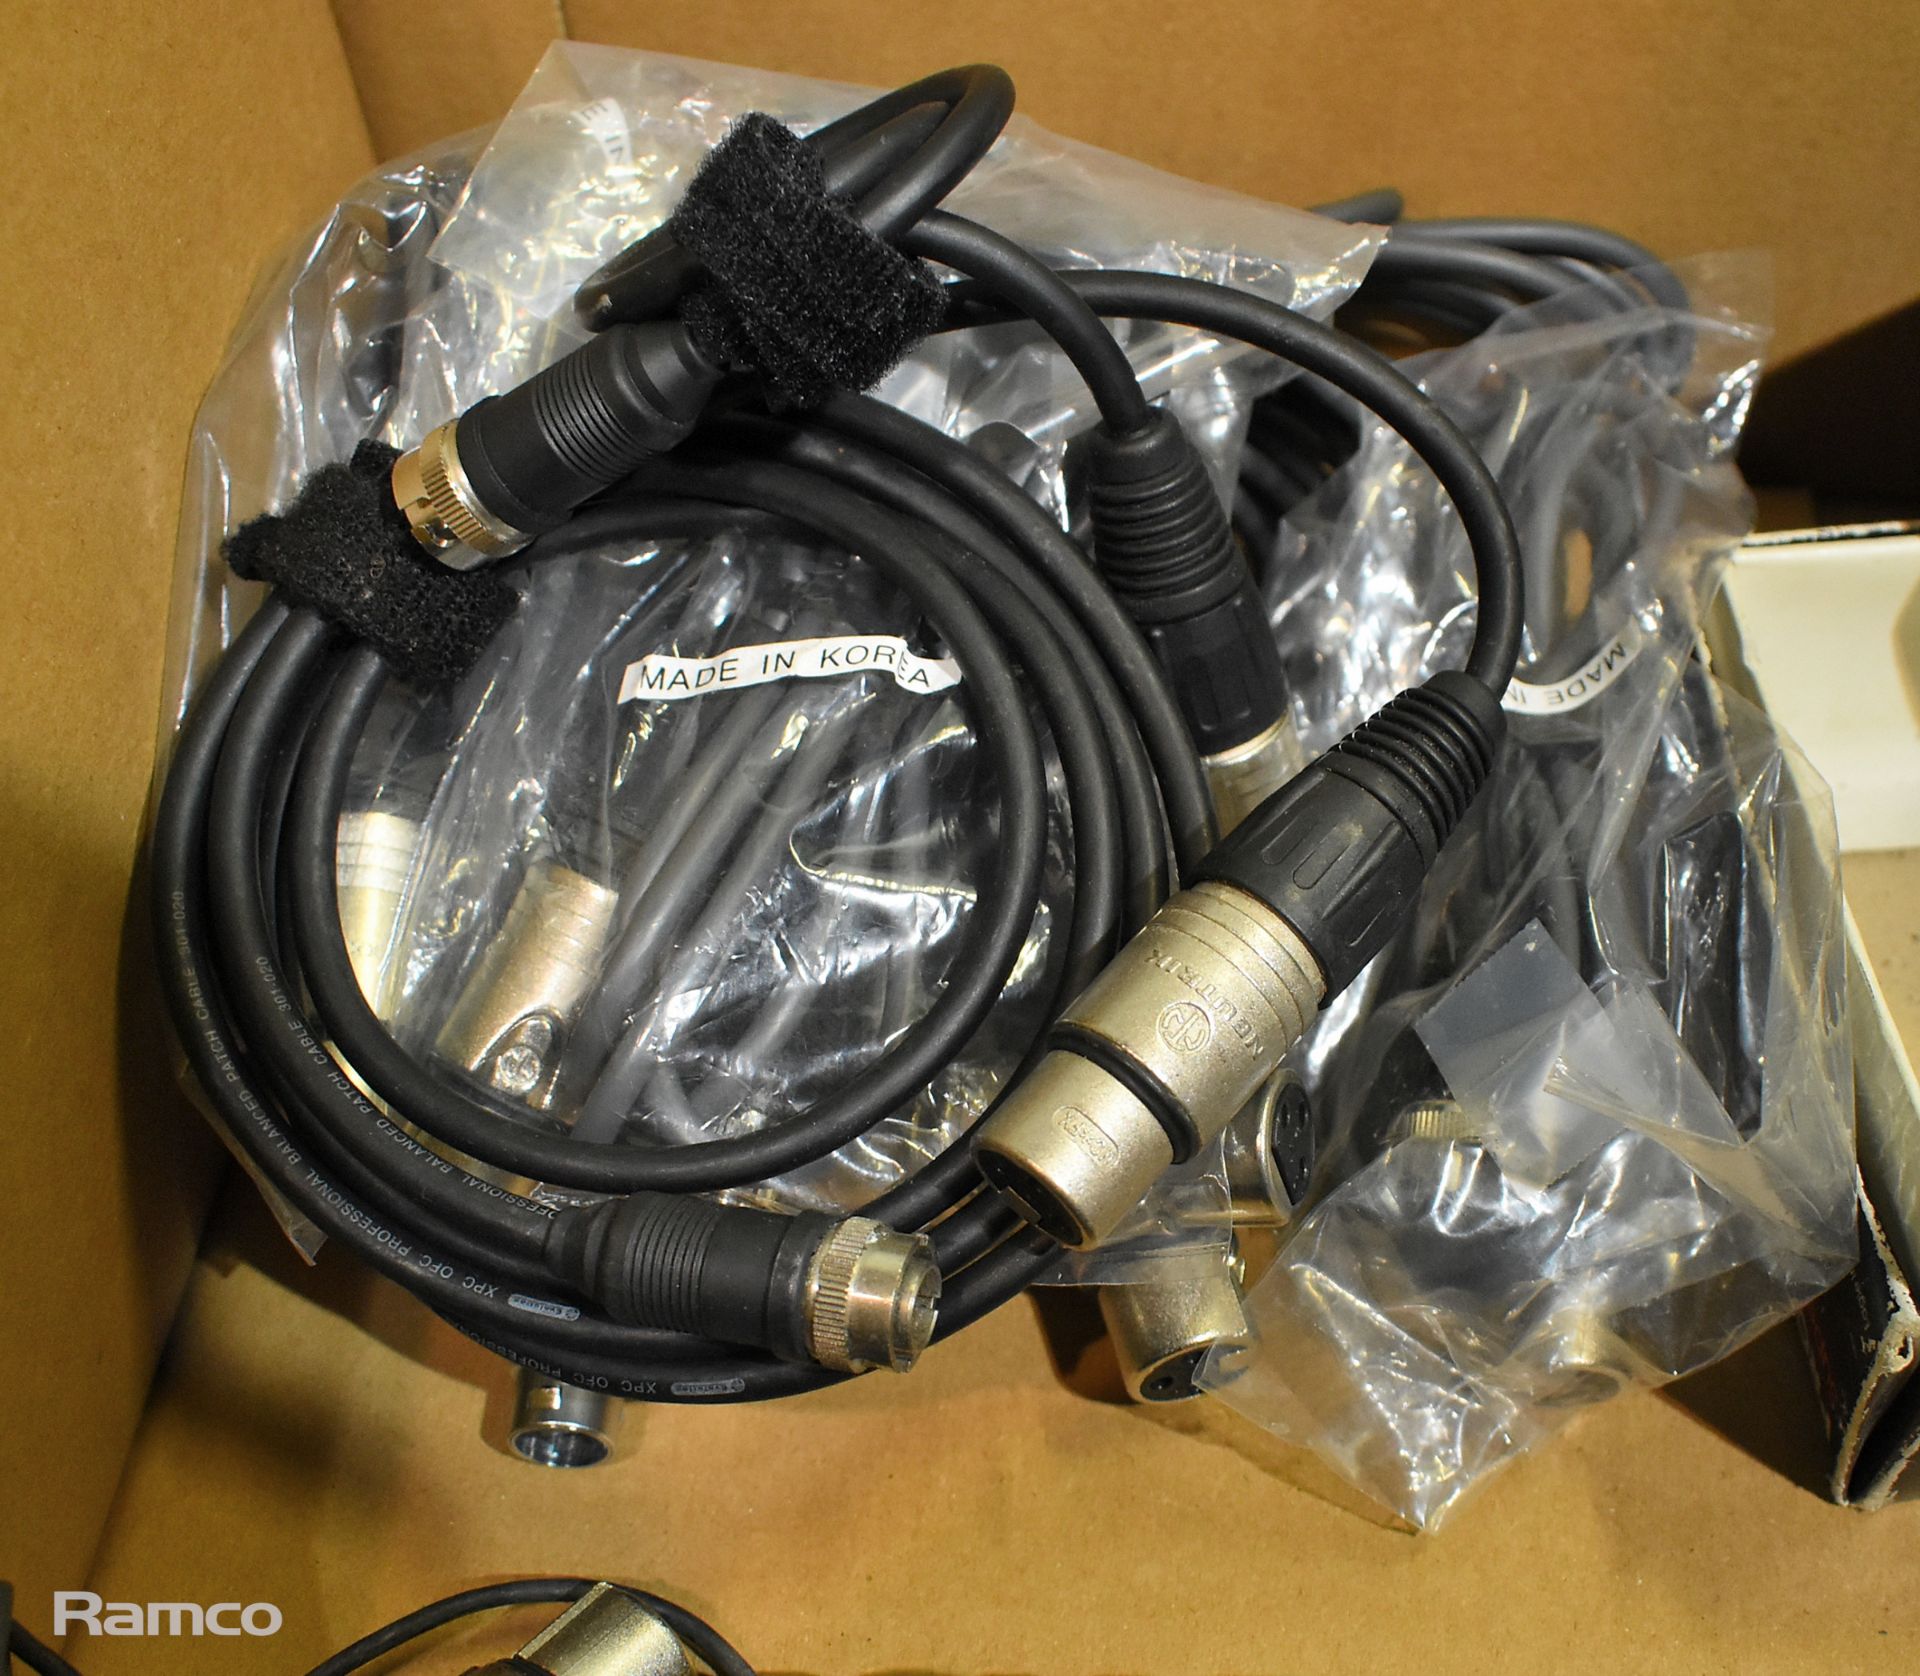 6x microphones with cables - includes Sony ECM-S959C & Sony ECM-50PBW - Image 2 of 6